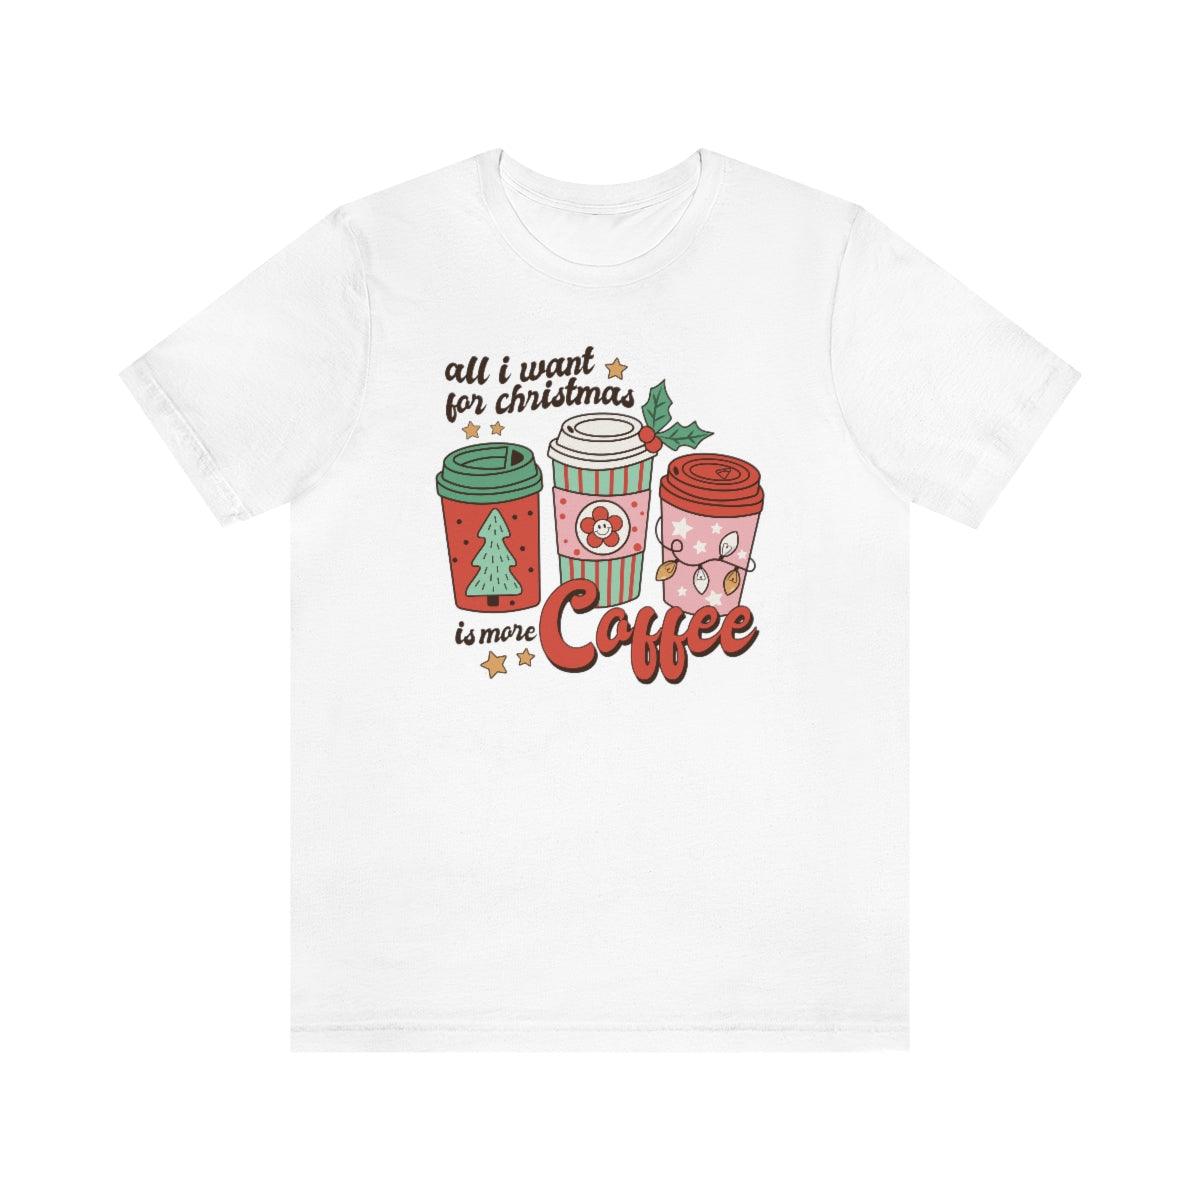 Retro All I want For Christmas Is More Coffee Christmas Shirt Short Sleeve Tee